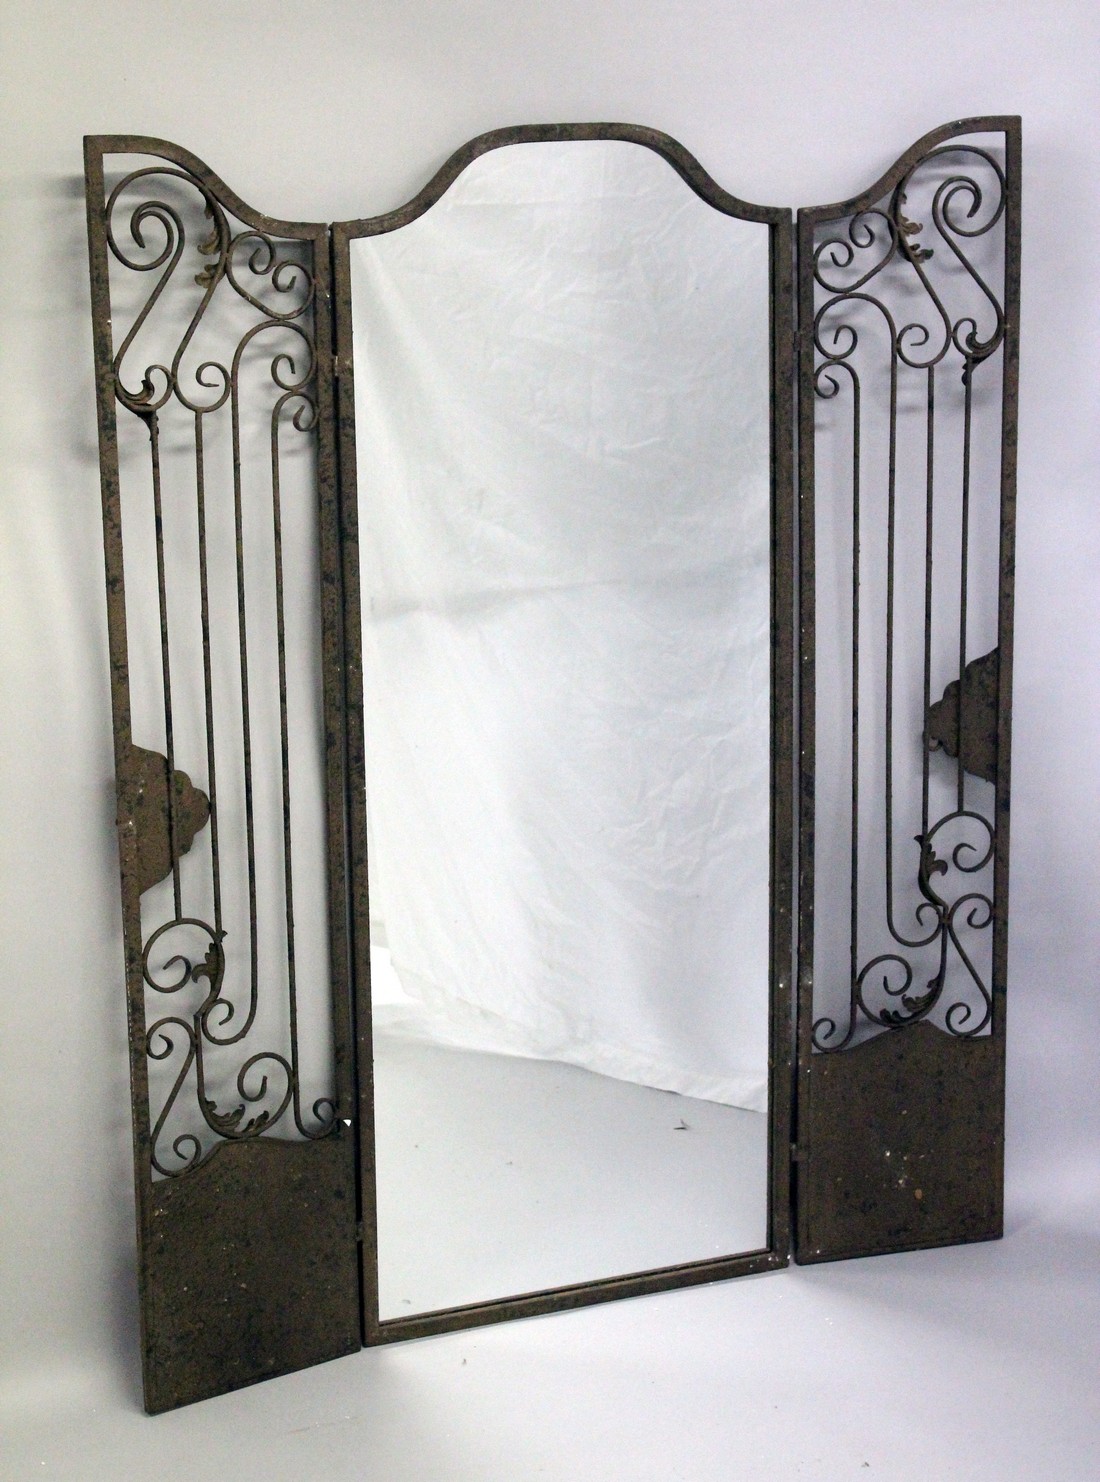 A MIRRORED IRON GATE. 5ft high. - Image 2 of 2